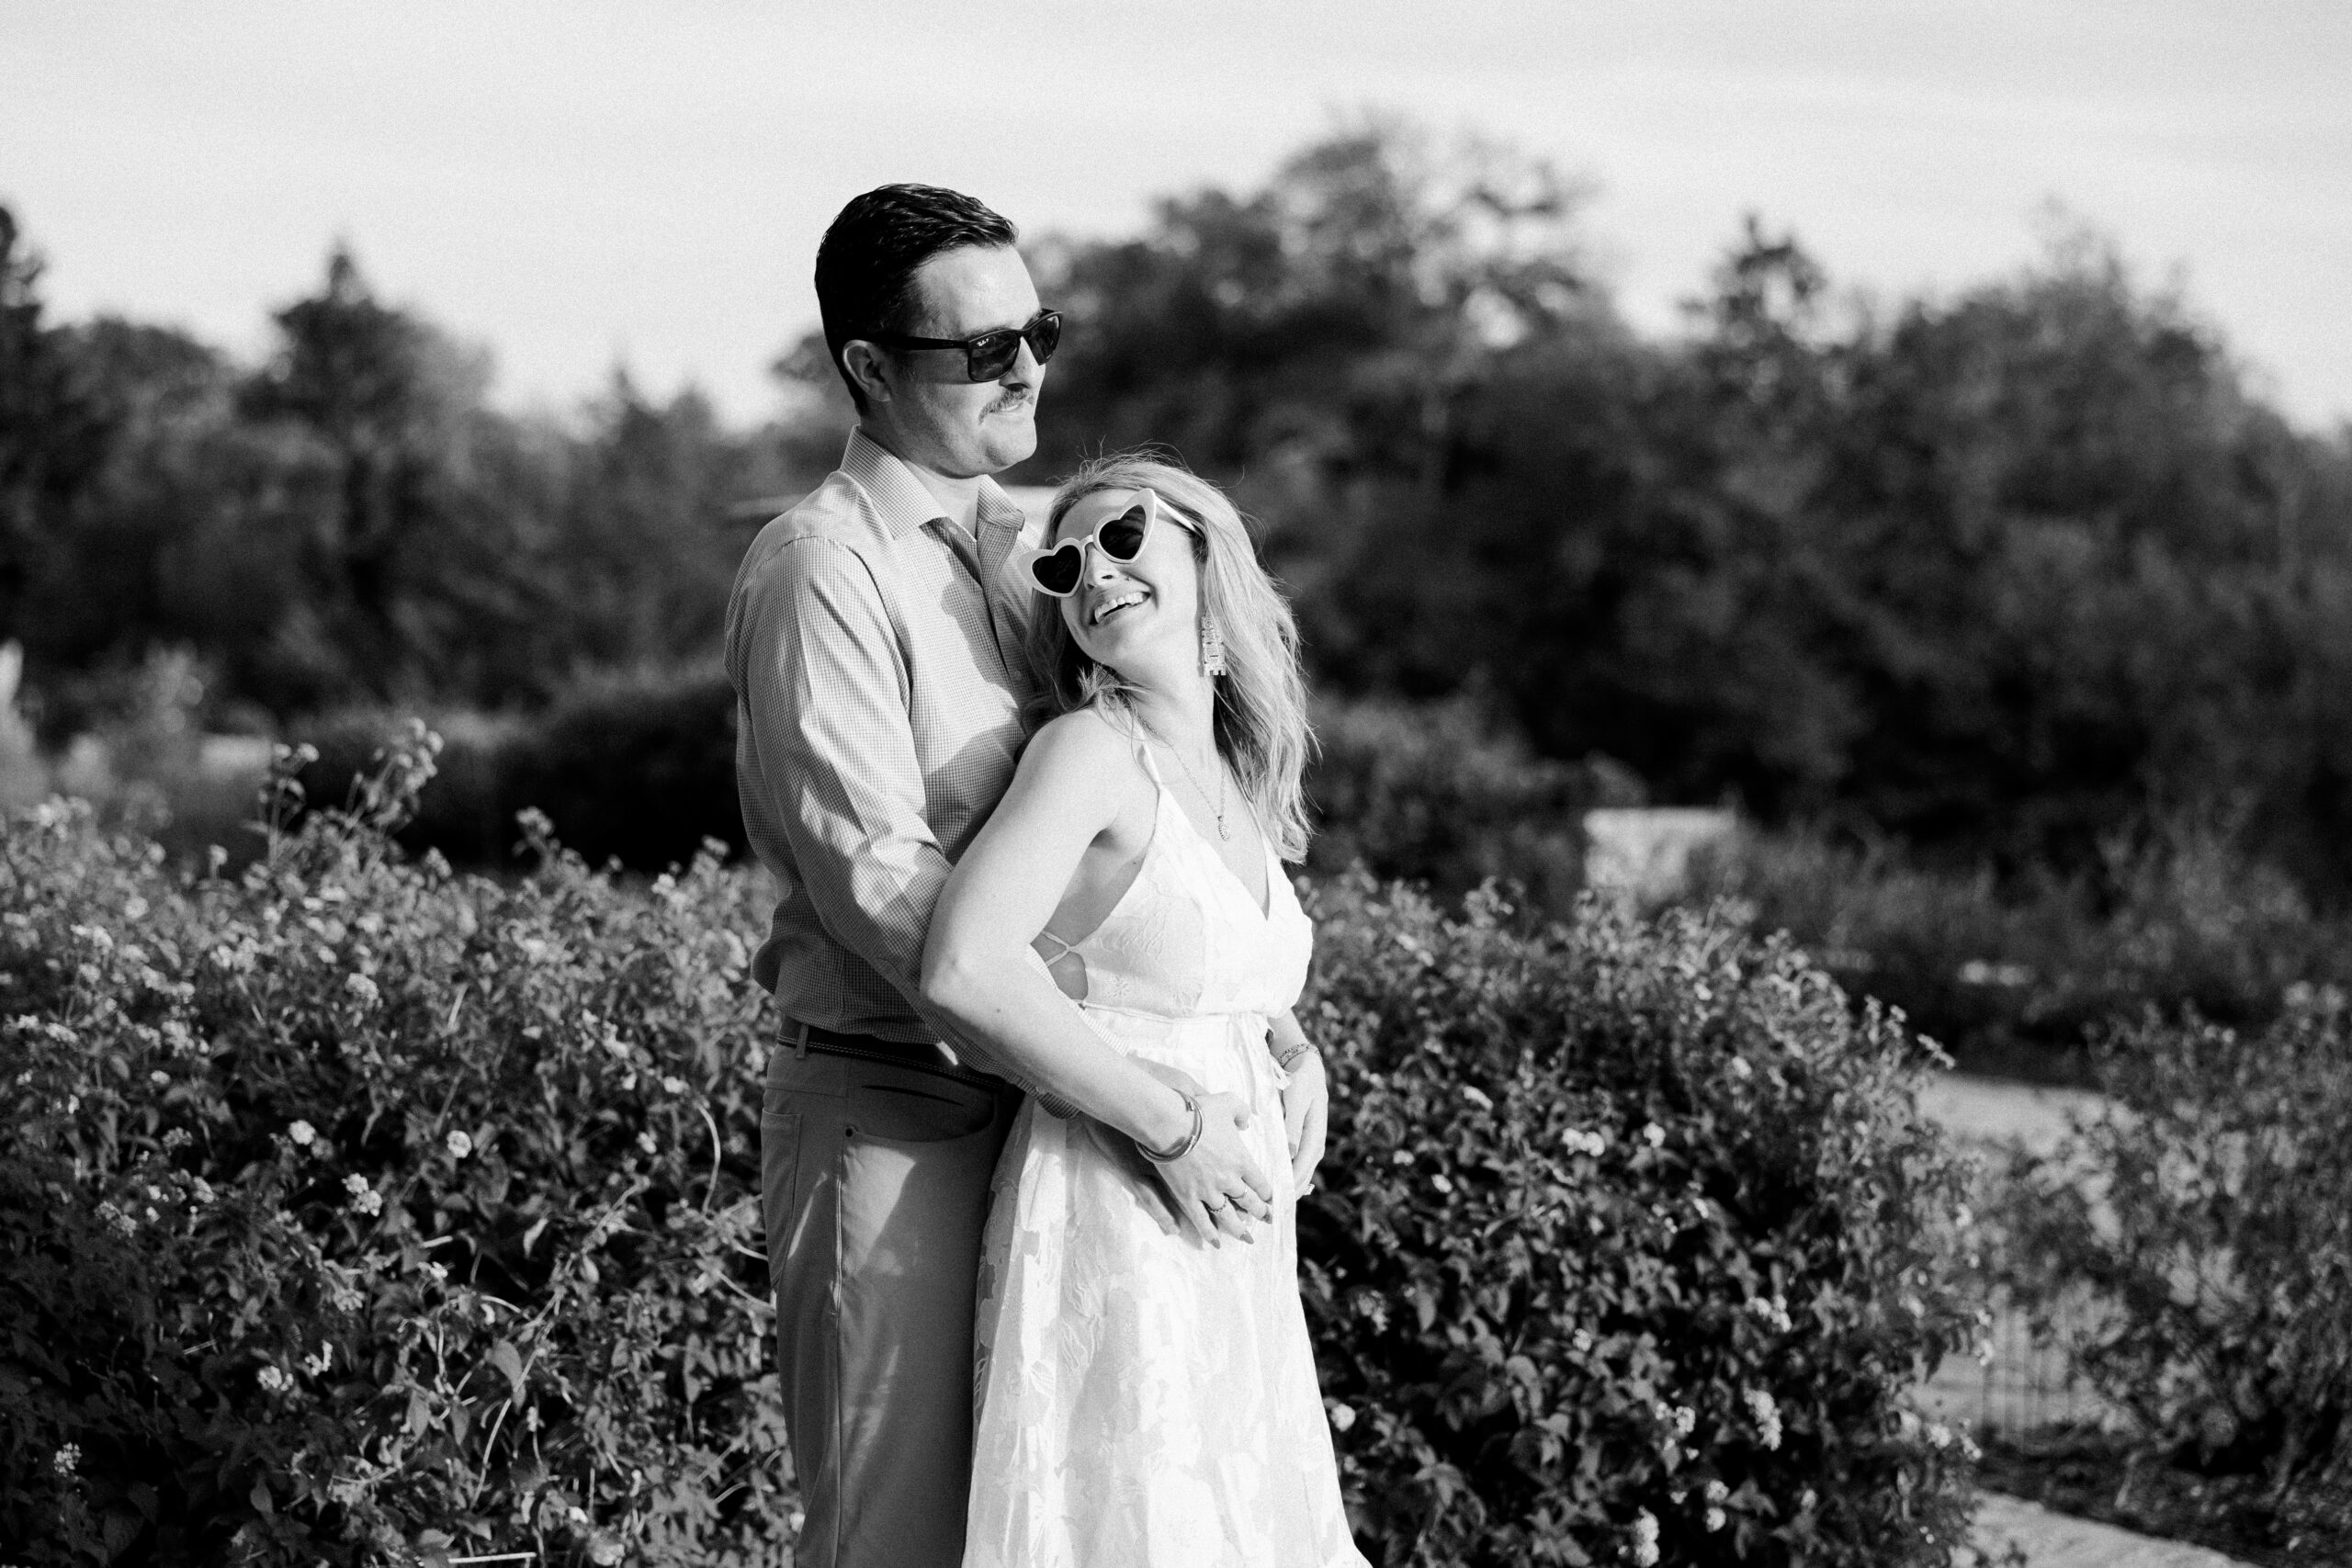 black and white photo of man wearing sunglasses hugging woman from behind, him facing the sun and her looking back at him. Woman is wearing heart shaped sunglasses